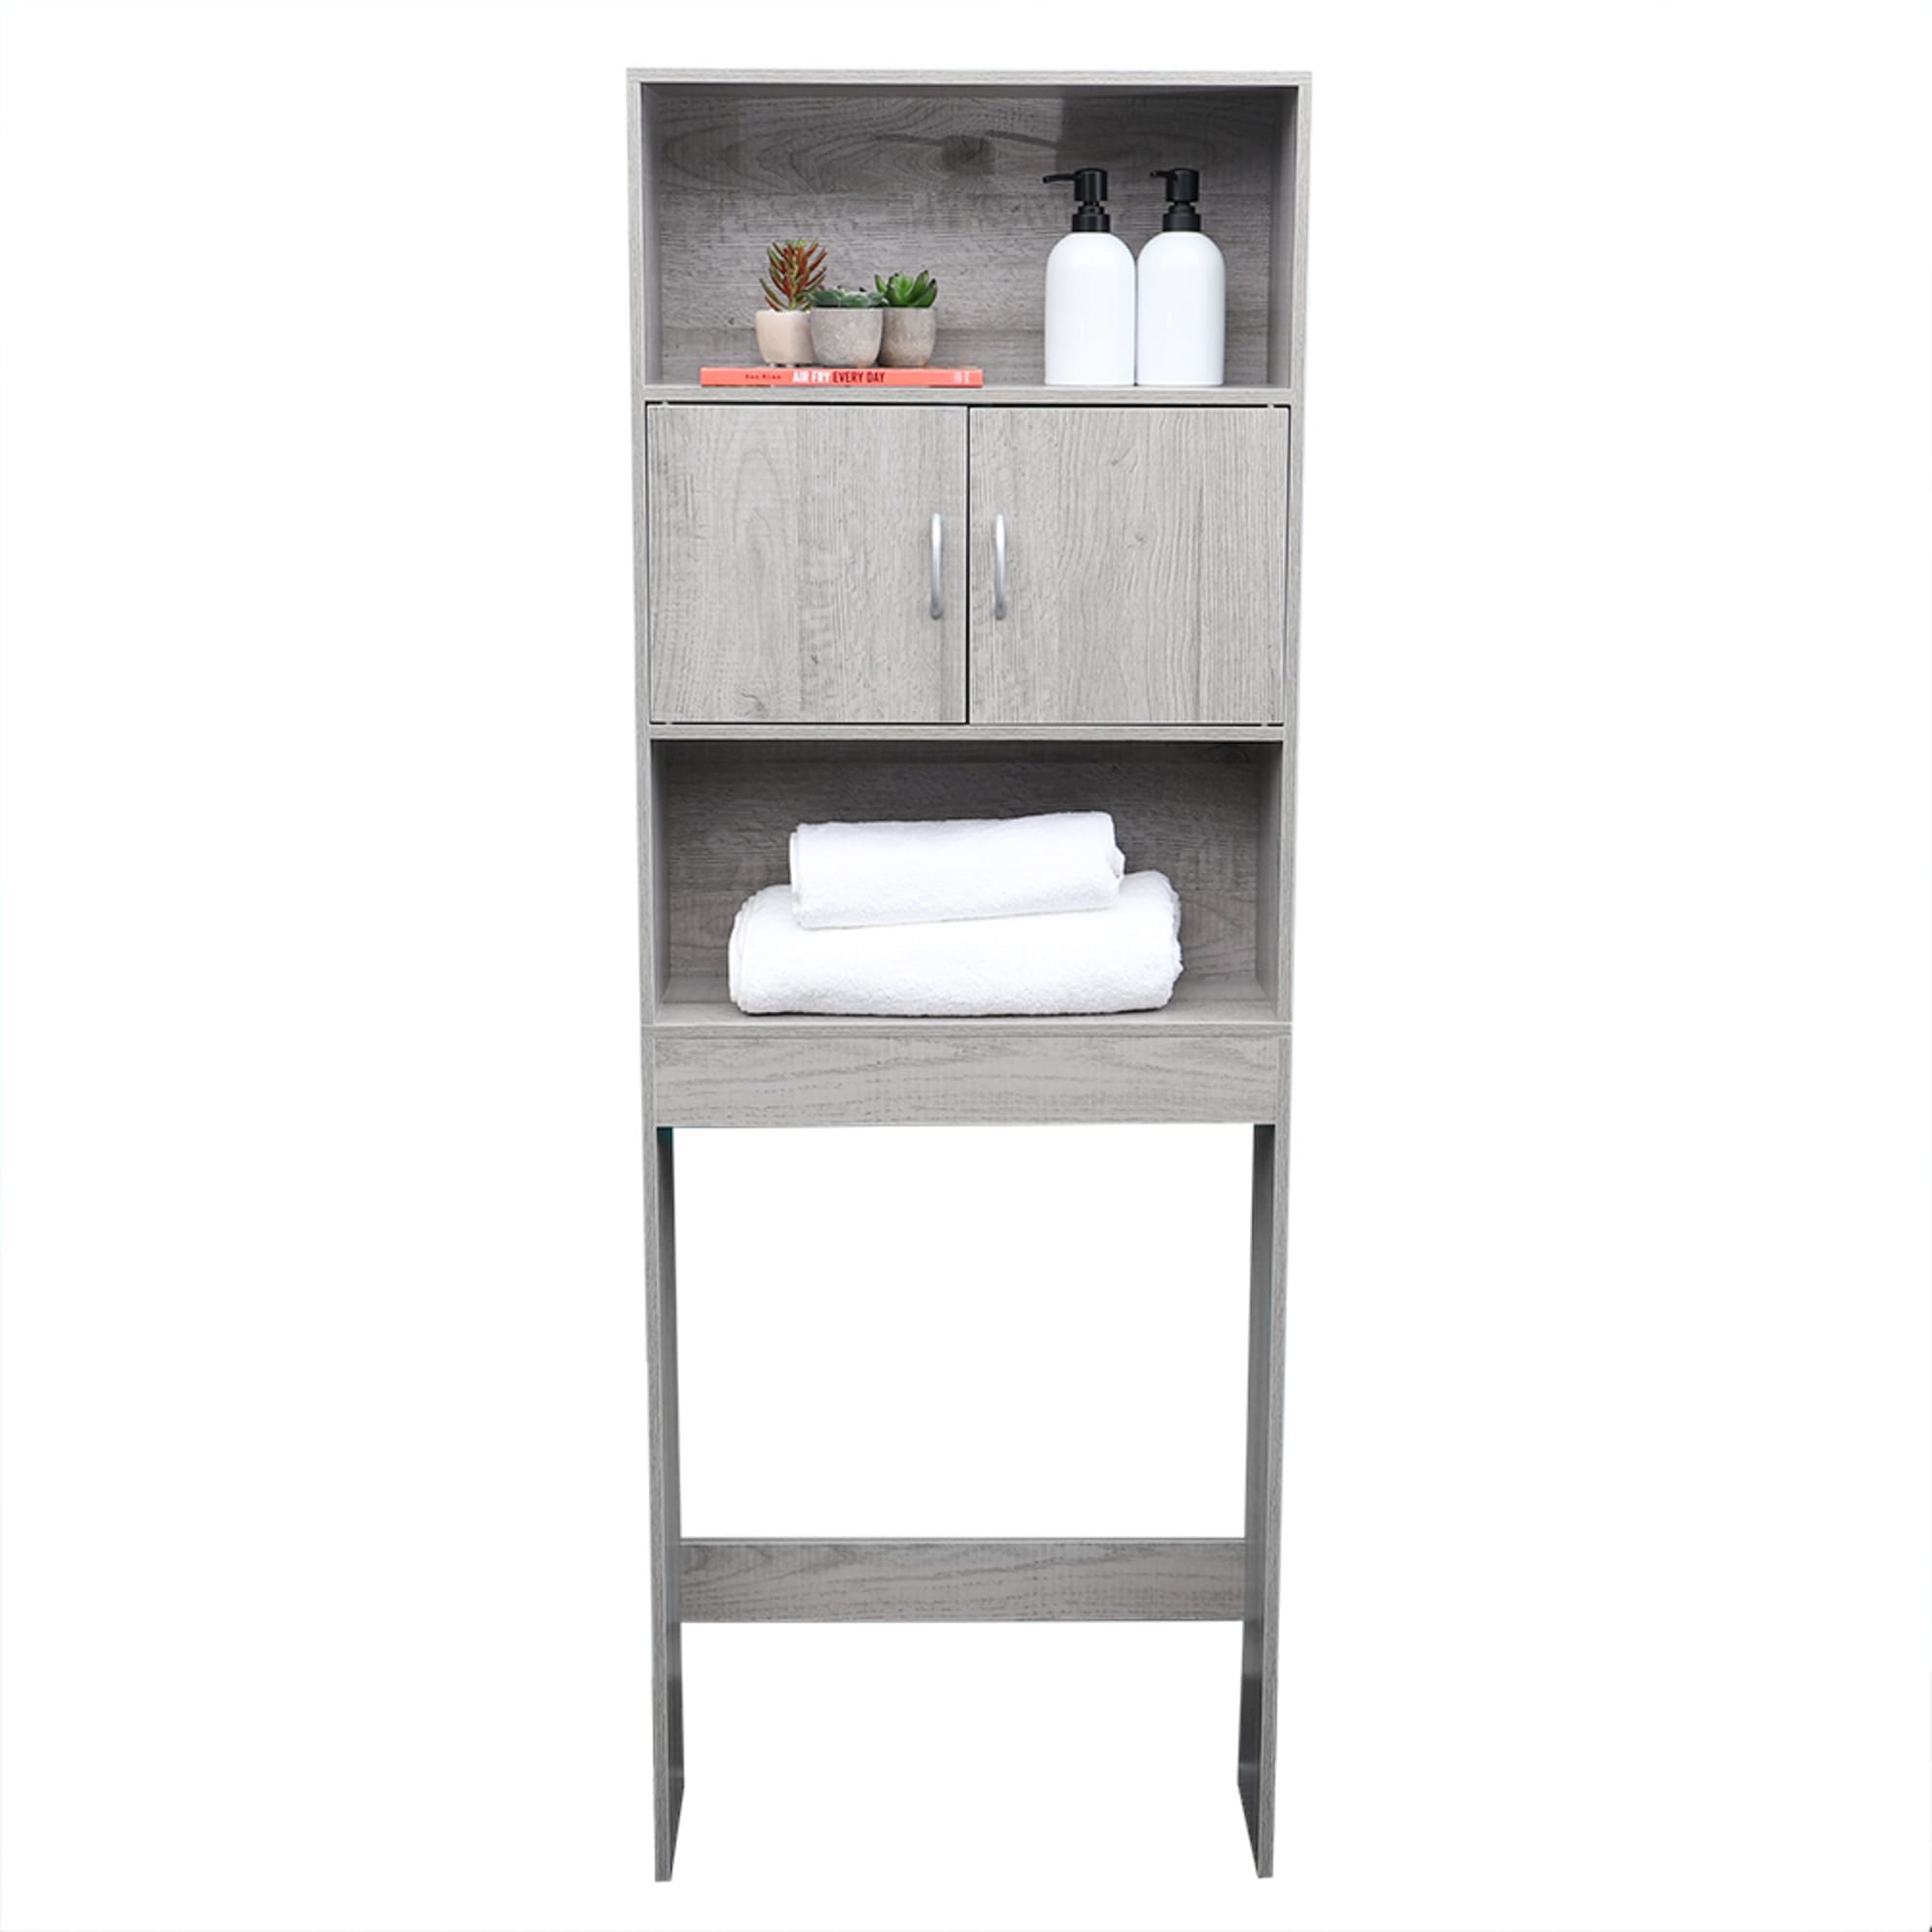 Home Basics 3 Tier Wood Space Saver Over the Toilet Bathroom Shelf with Open Shelving and Cabinets, Grey $60.00 EACH, CASE PACK OF 1